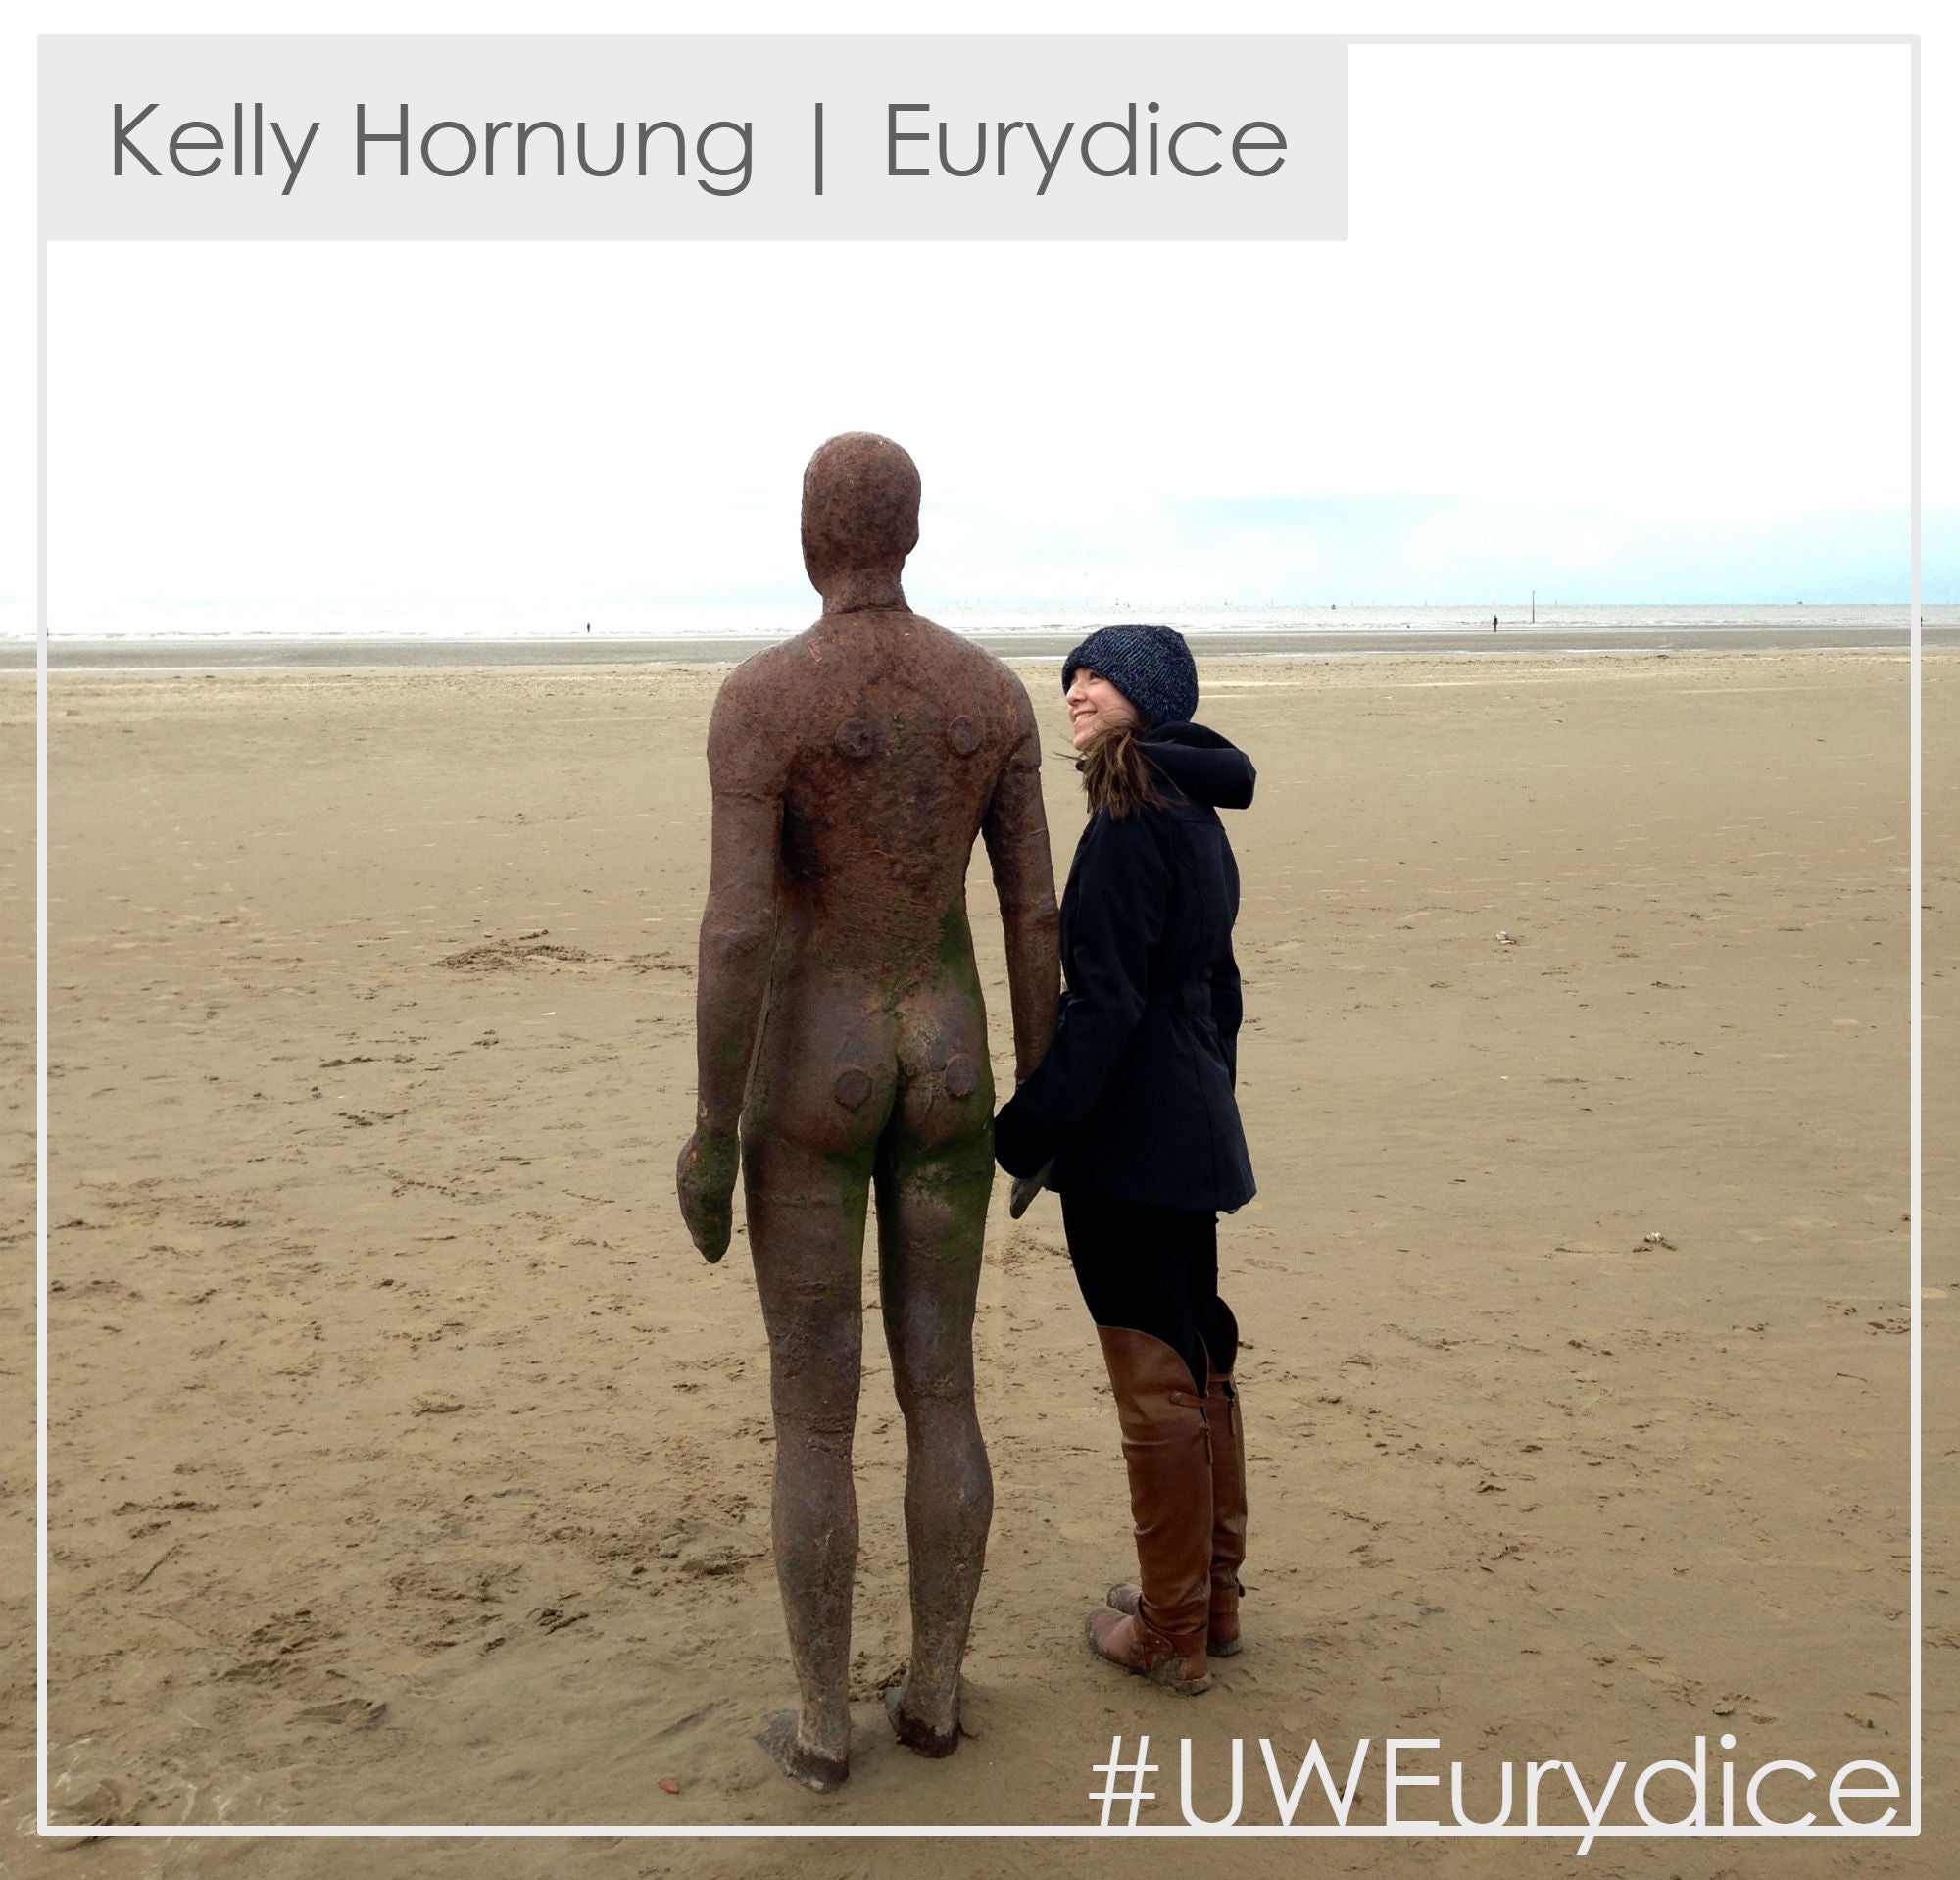 Photo of Kelly Hornung next to a statue on a beach